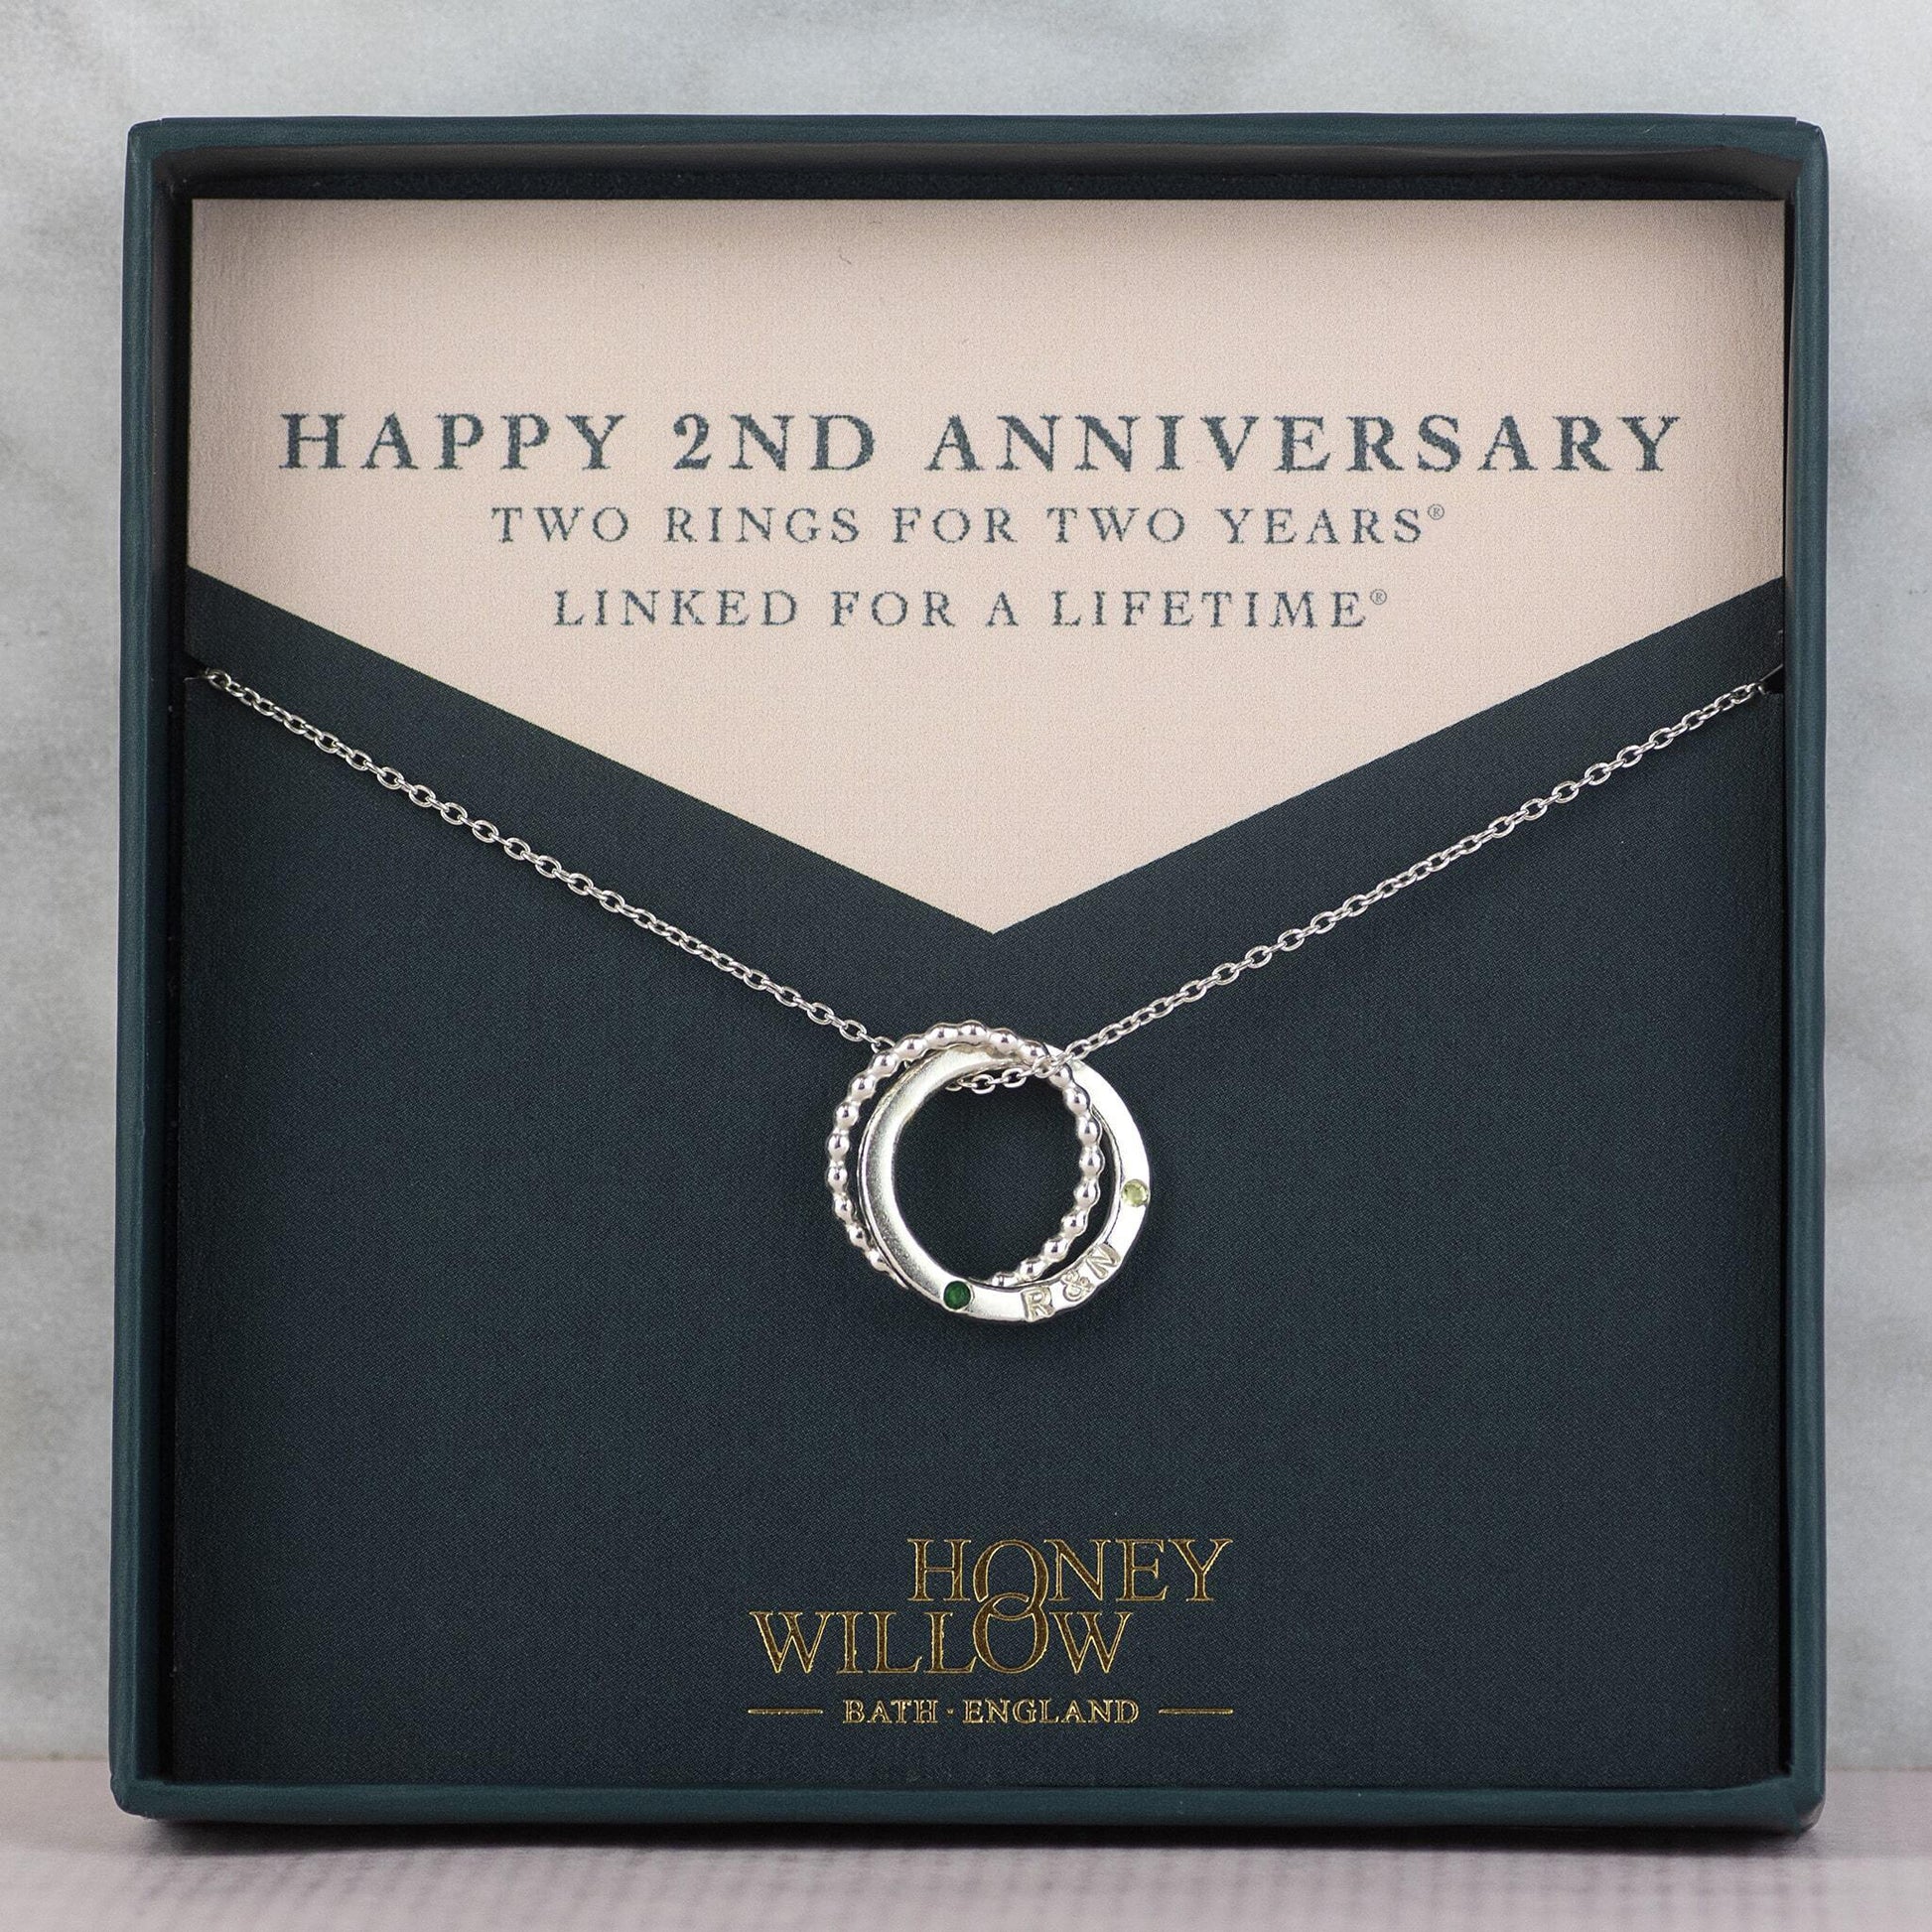 Personalised 2nd Anniversary Birthstones Necklace - Petite Silver - 2 Rings for 2 Years®